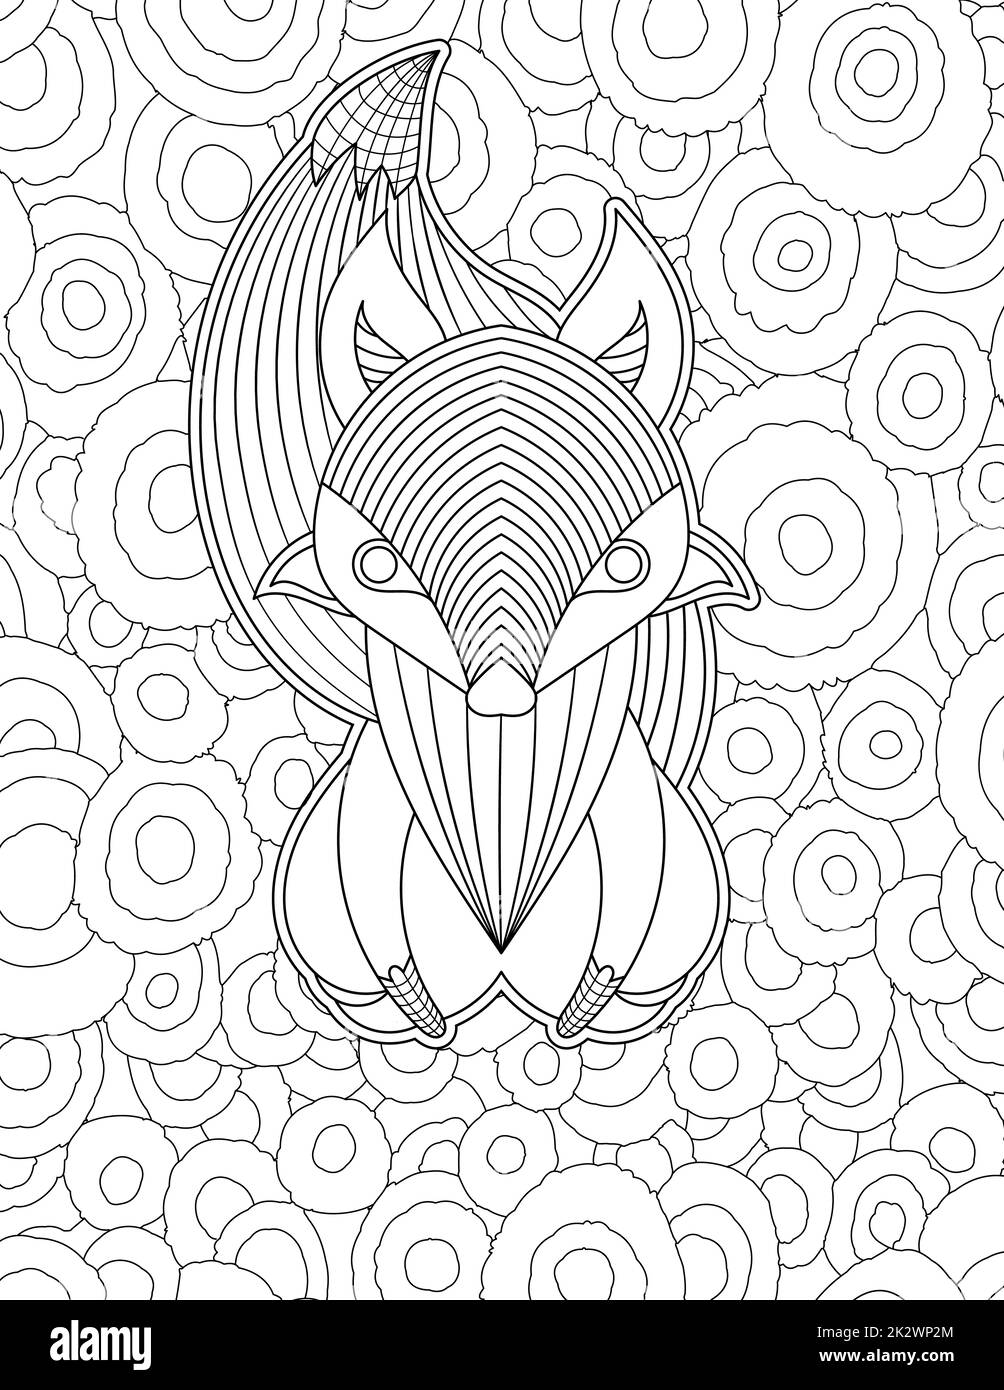 Stylized vector line drawing cute fox flowy tail patterned circular background. Simplified digital lineart image sitting animal cicle texture. Outline artwork abstract design. Stock Photo